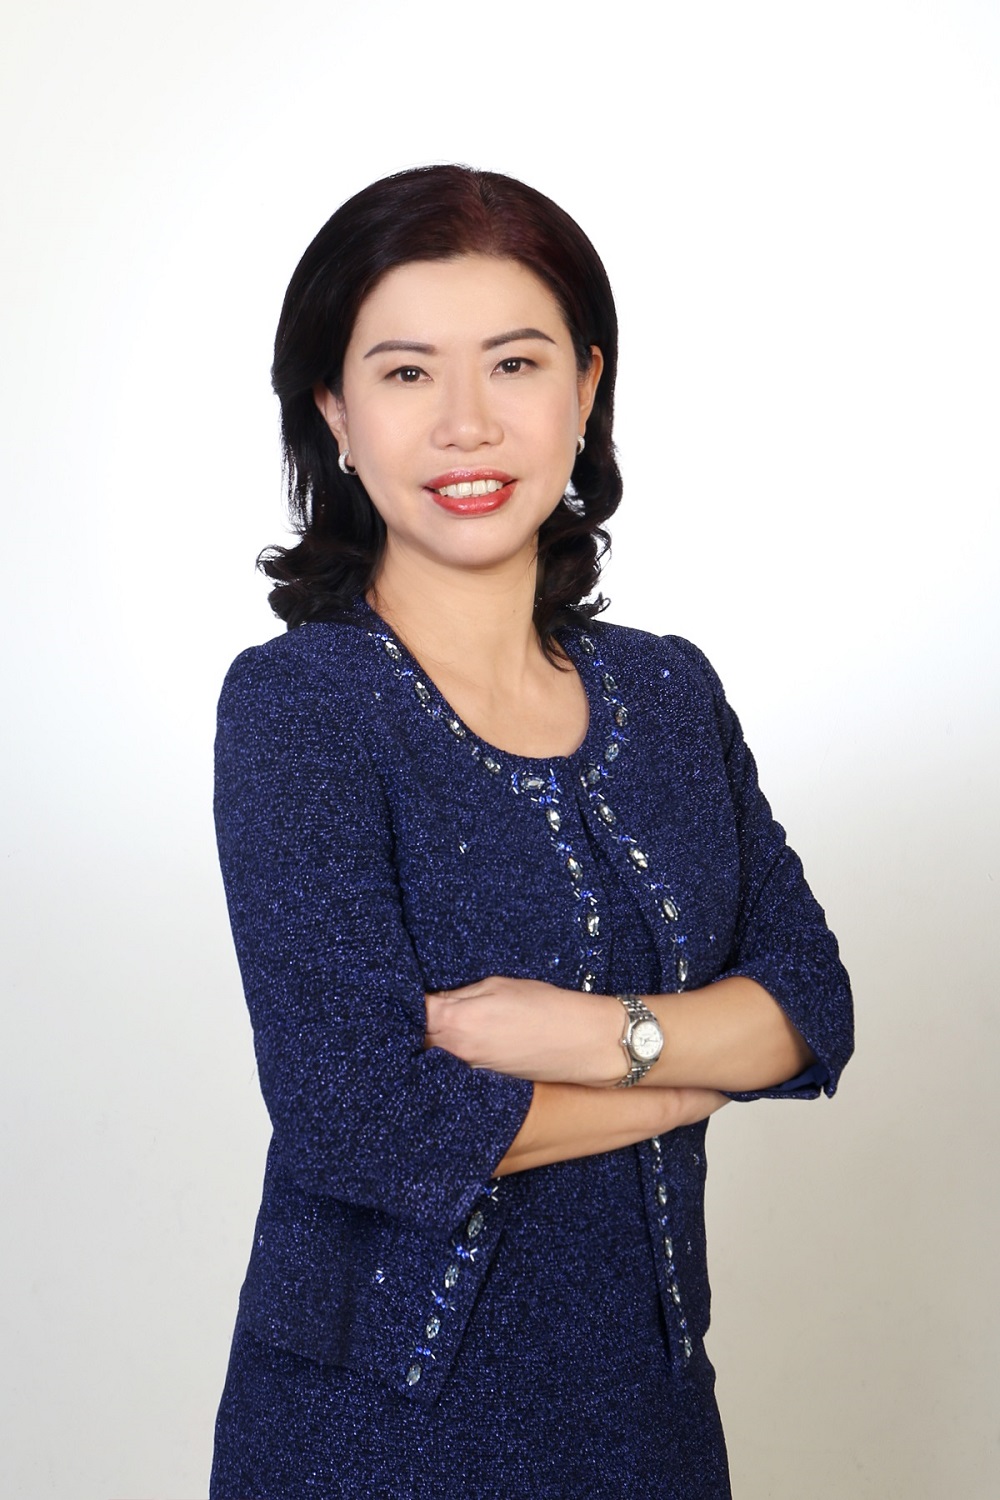 Brenda Tan, Vice President of the Channels and Partner Organization, Asia Pacific & Japan at NetApp